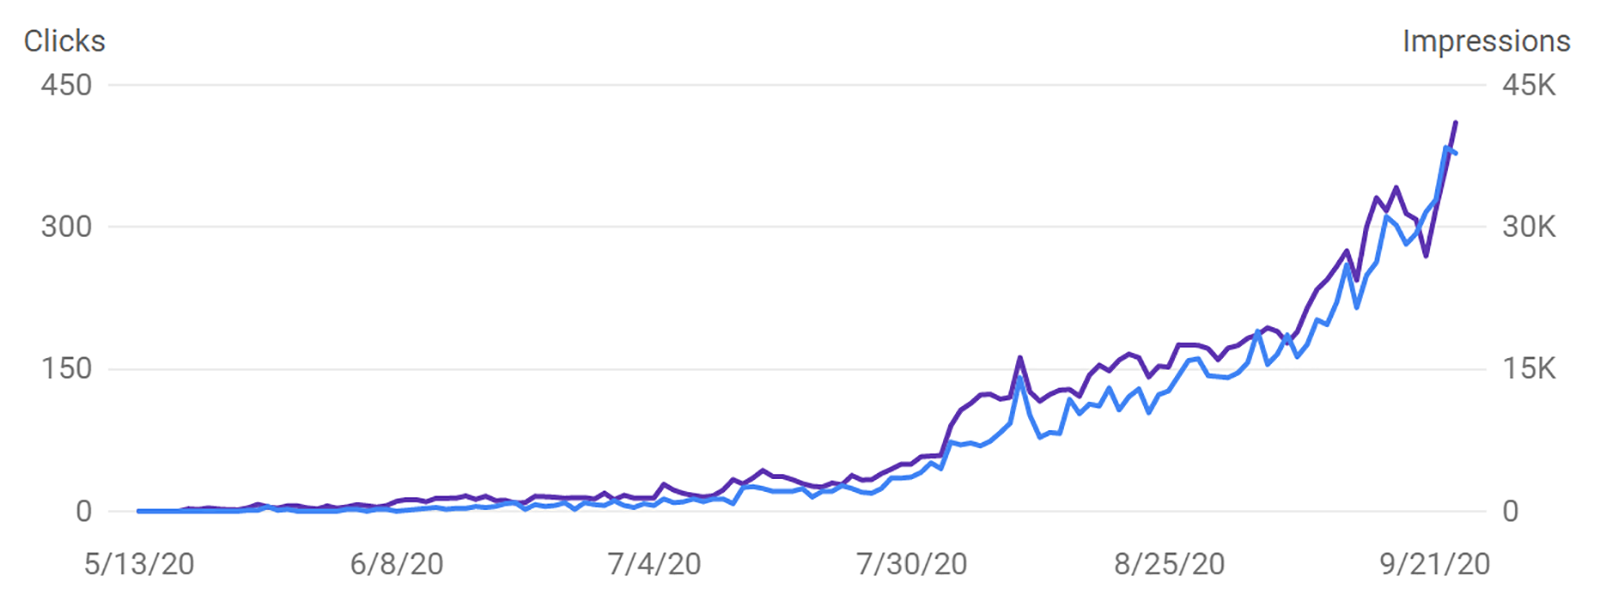 Screenshot of Google Search Console data showing exponential growth in search impressions and clicks.